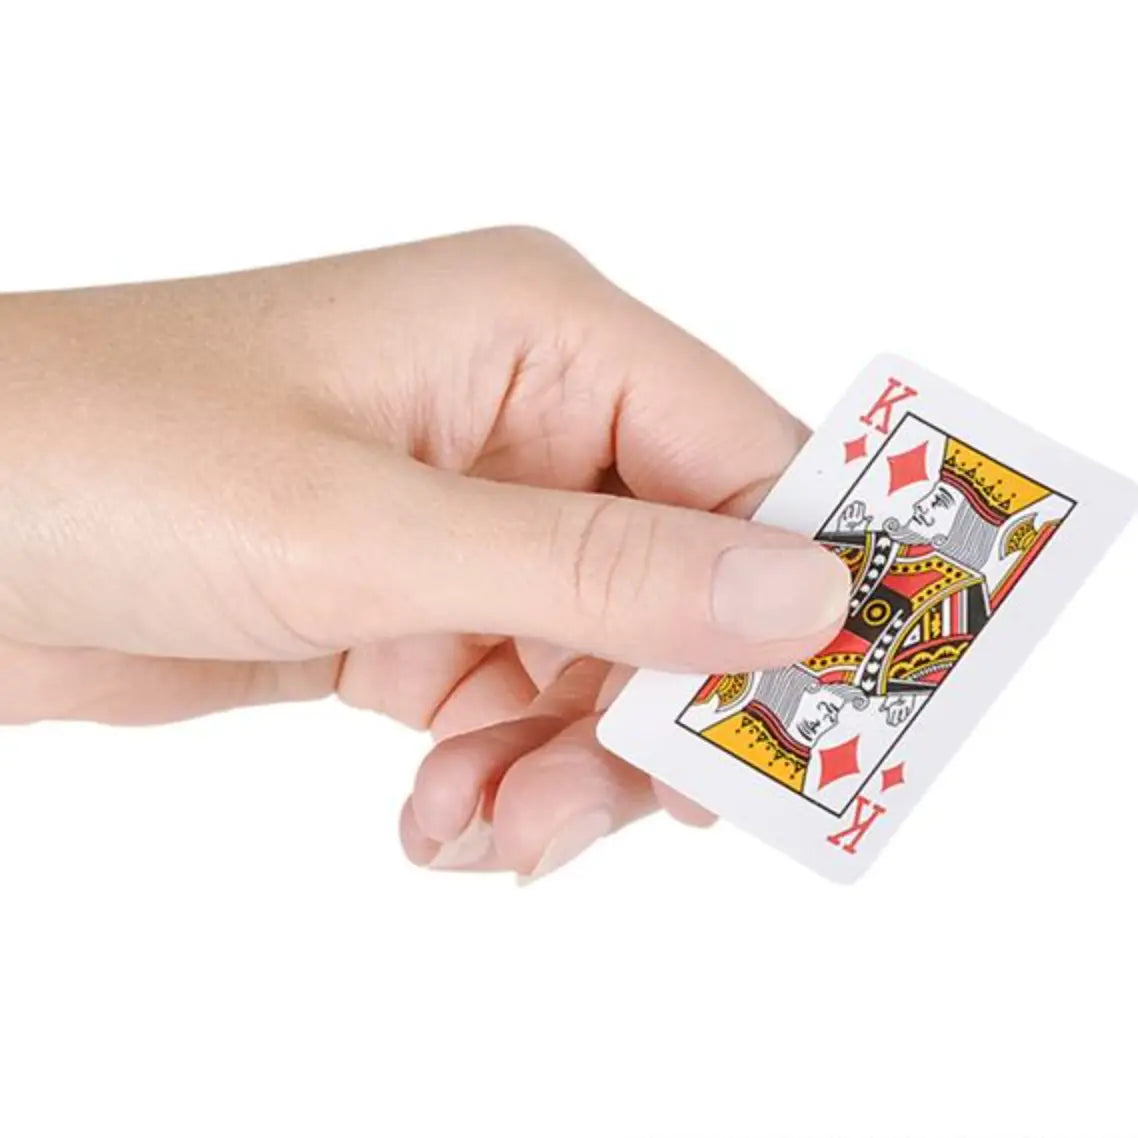 TINY GIFTS - MINI PLAYING CARDS